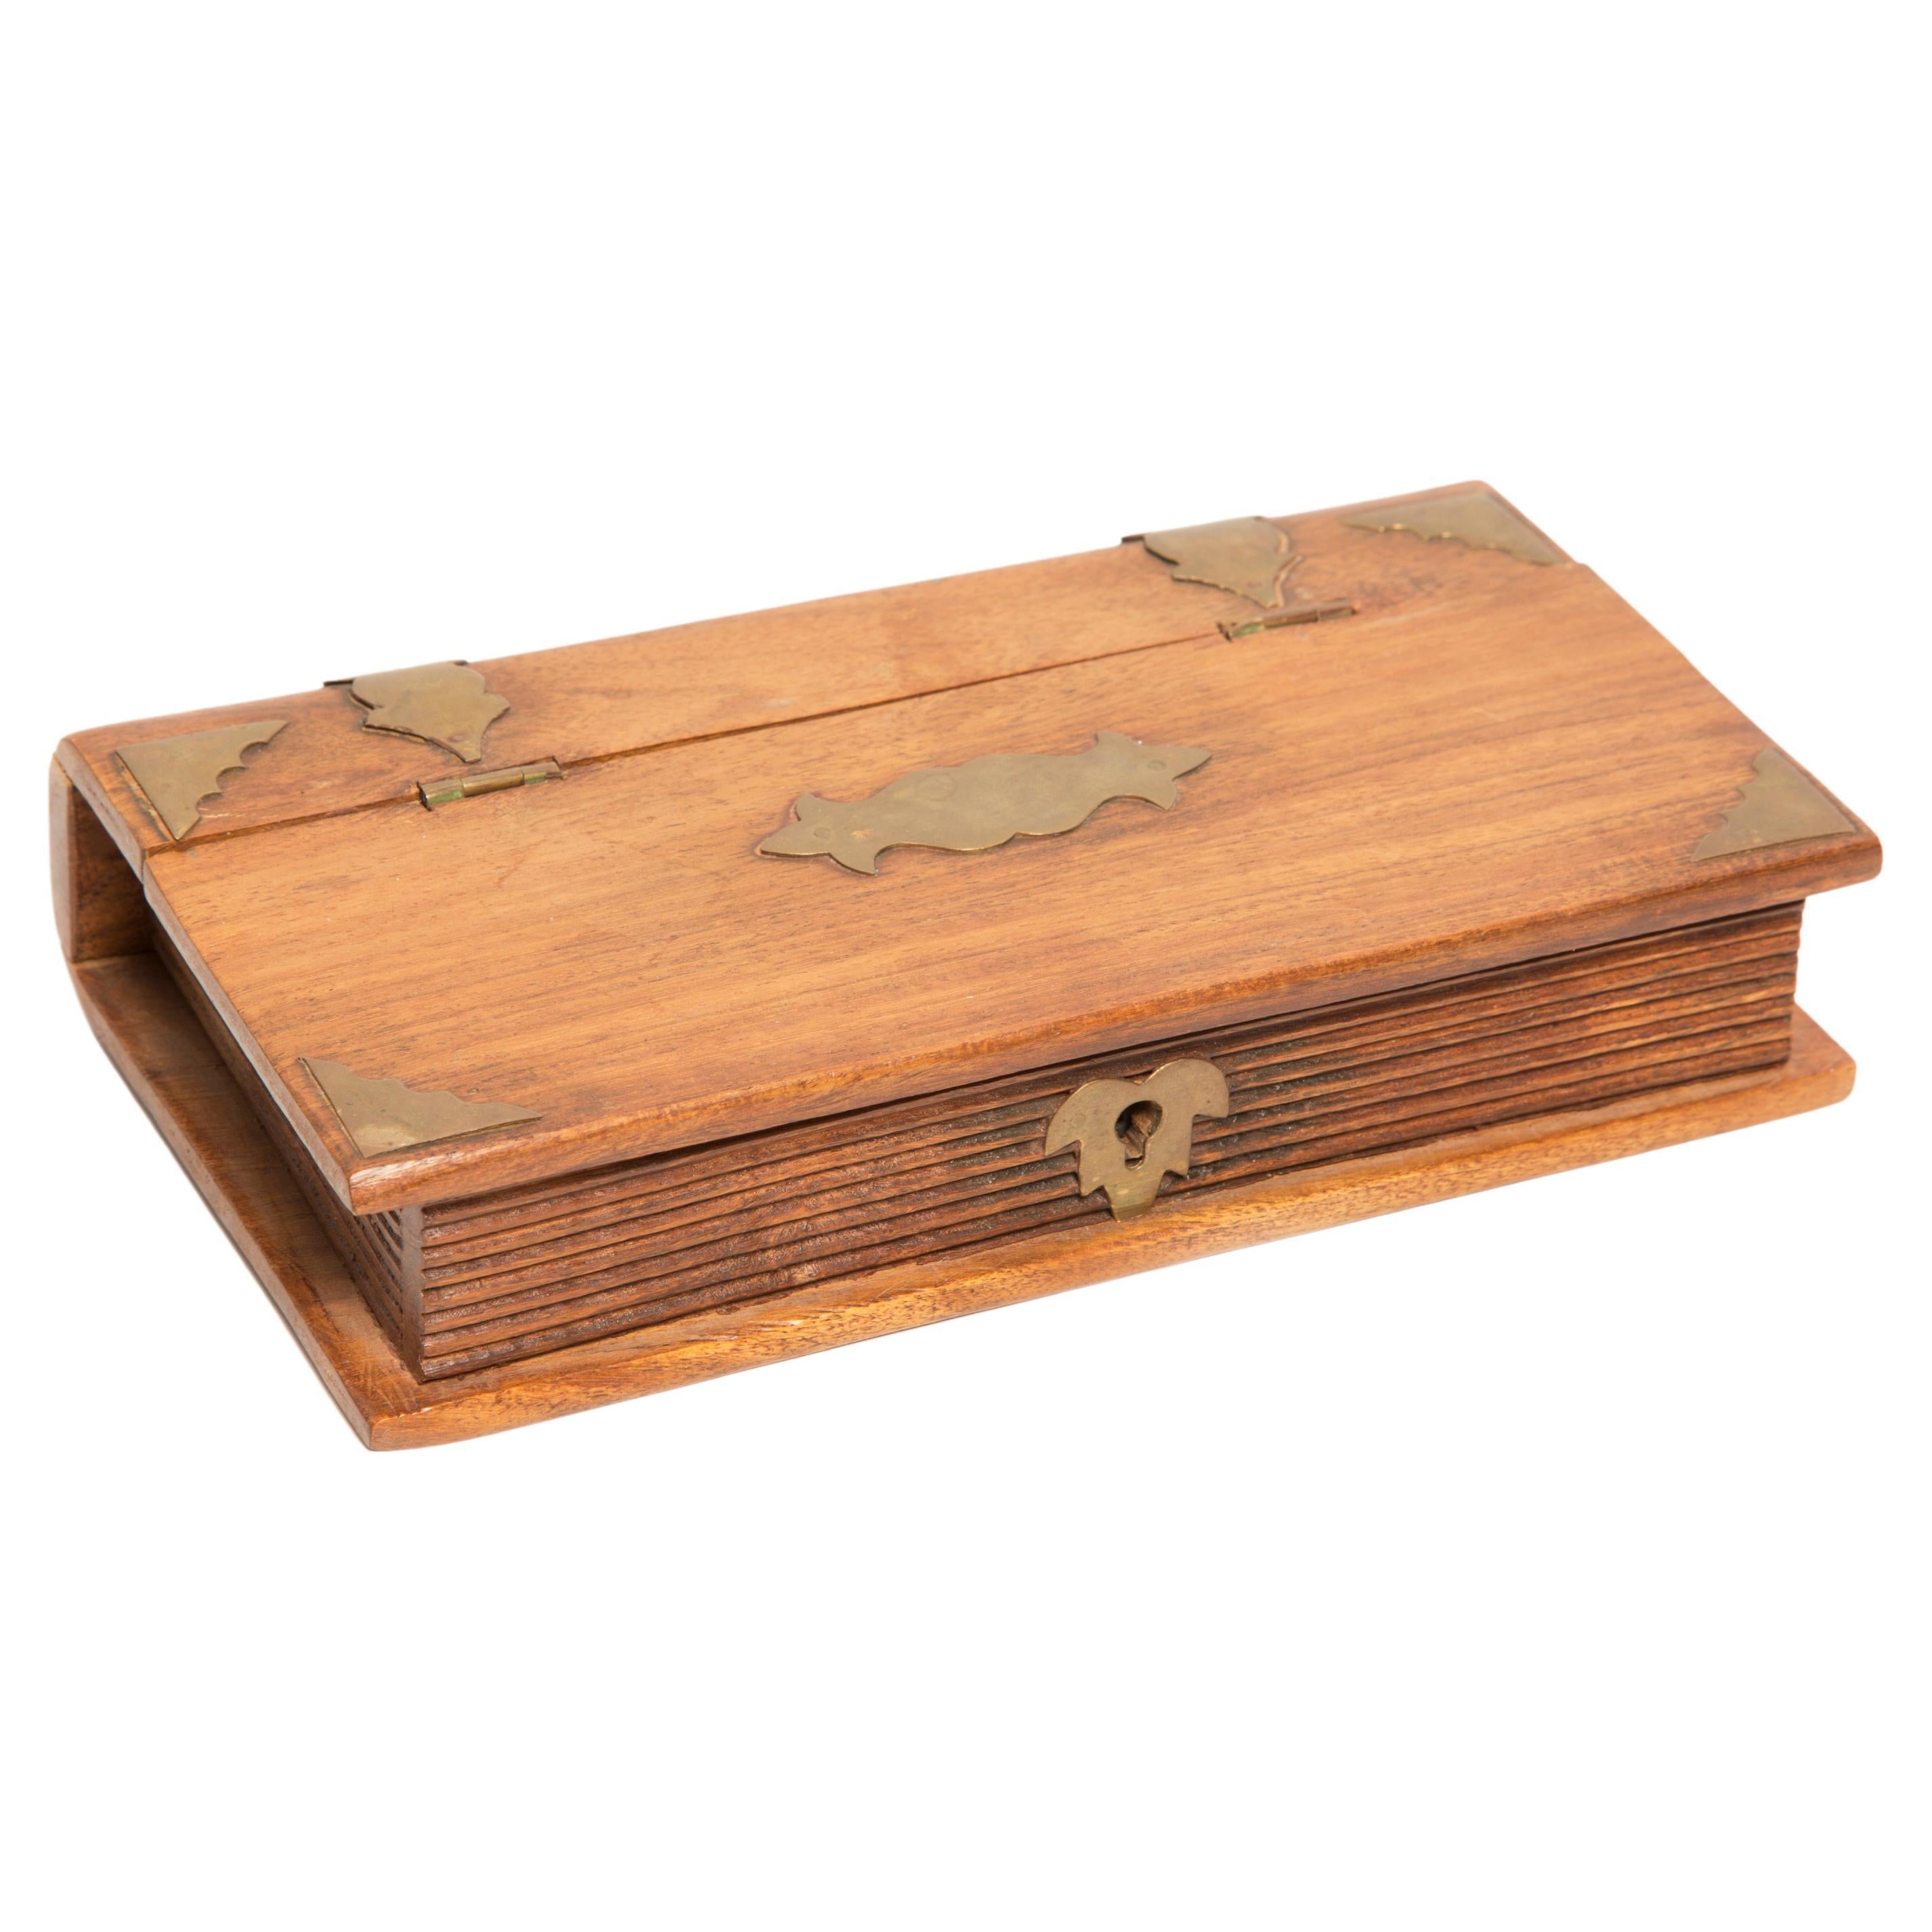 Midcentury Wood Casket, Cigarette Case, or Jewelry Box, Italy, 1960s For Sale